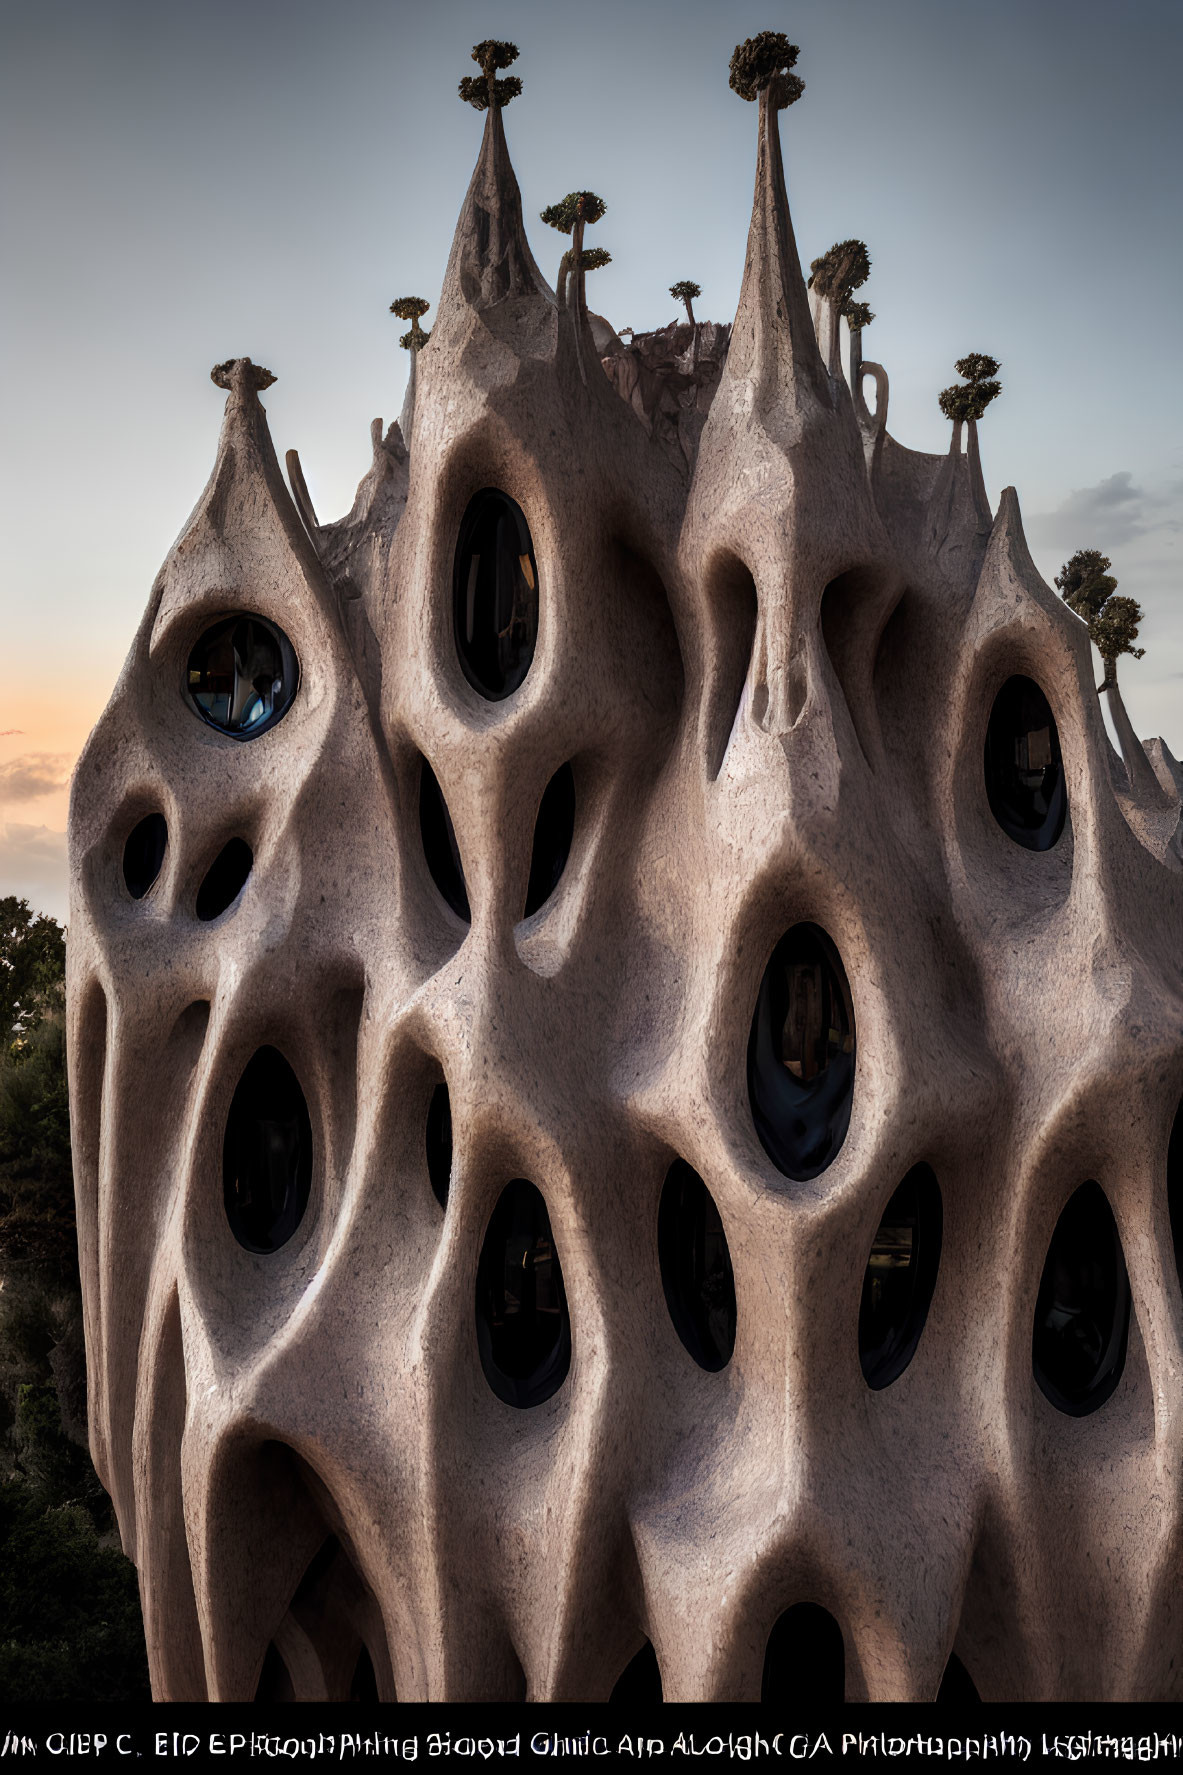 Organic Design Building with Rounded Windows and Bone-like Structures